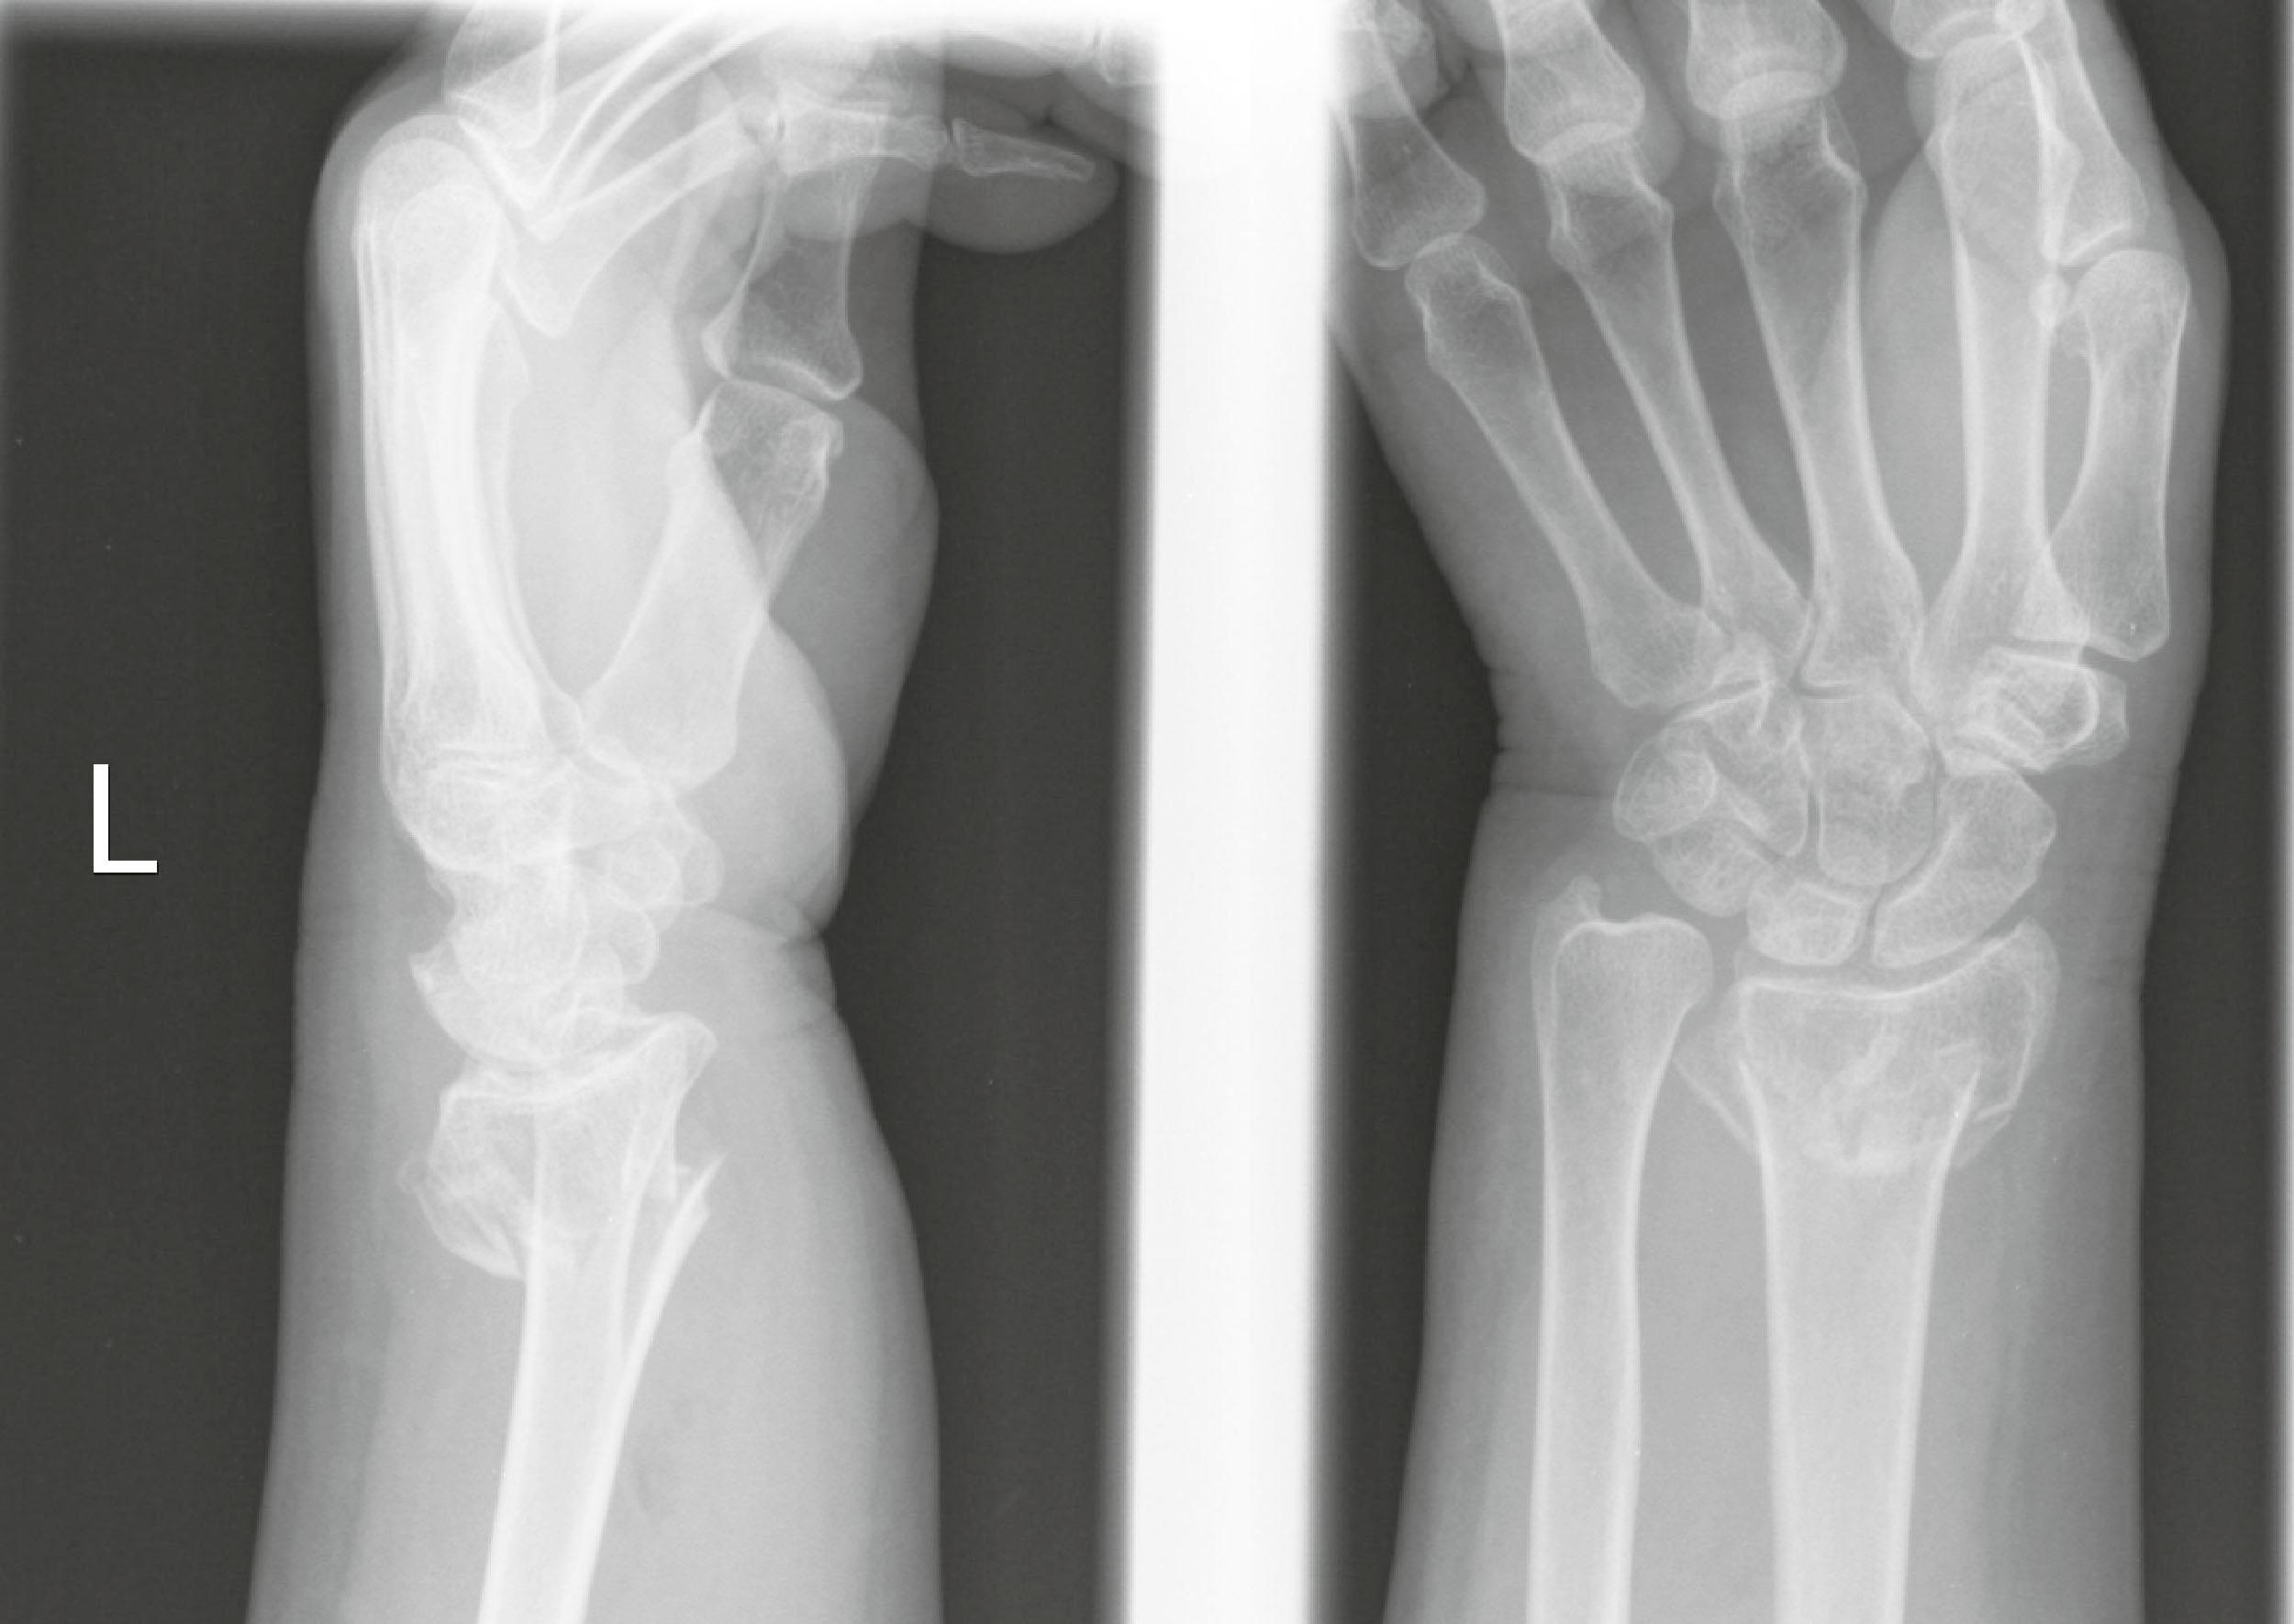 Figure 3.27, Distal radius fracture with loss of the normal radial height, inclination, and volar tilt.